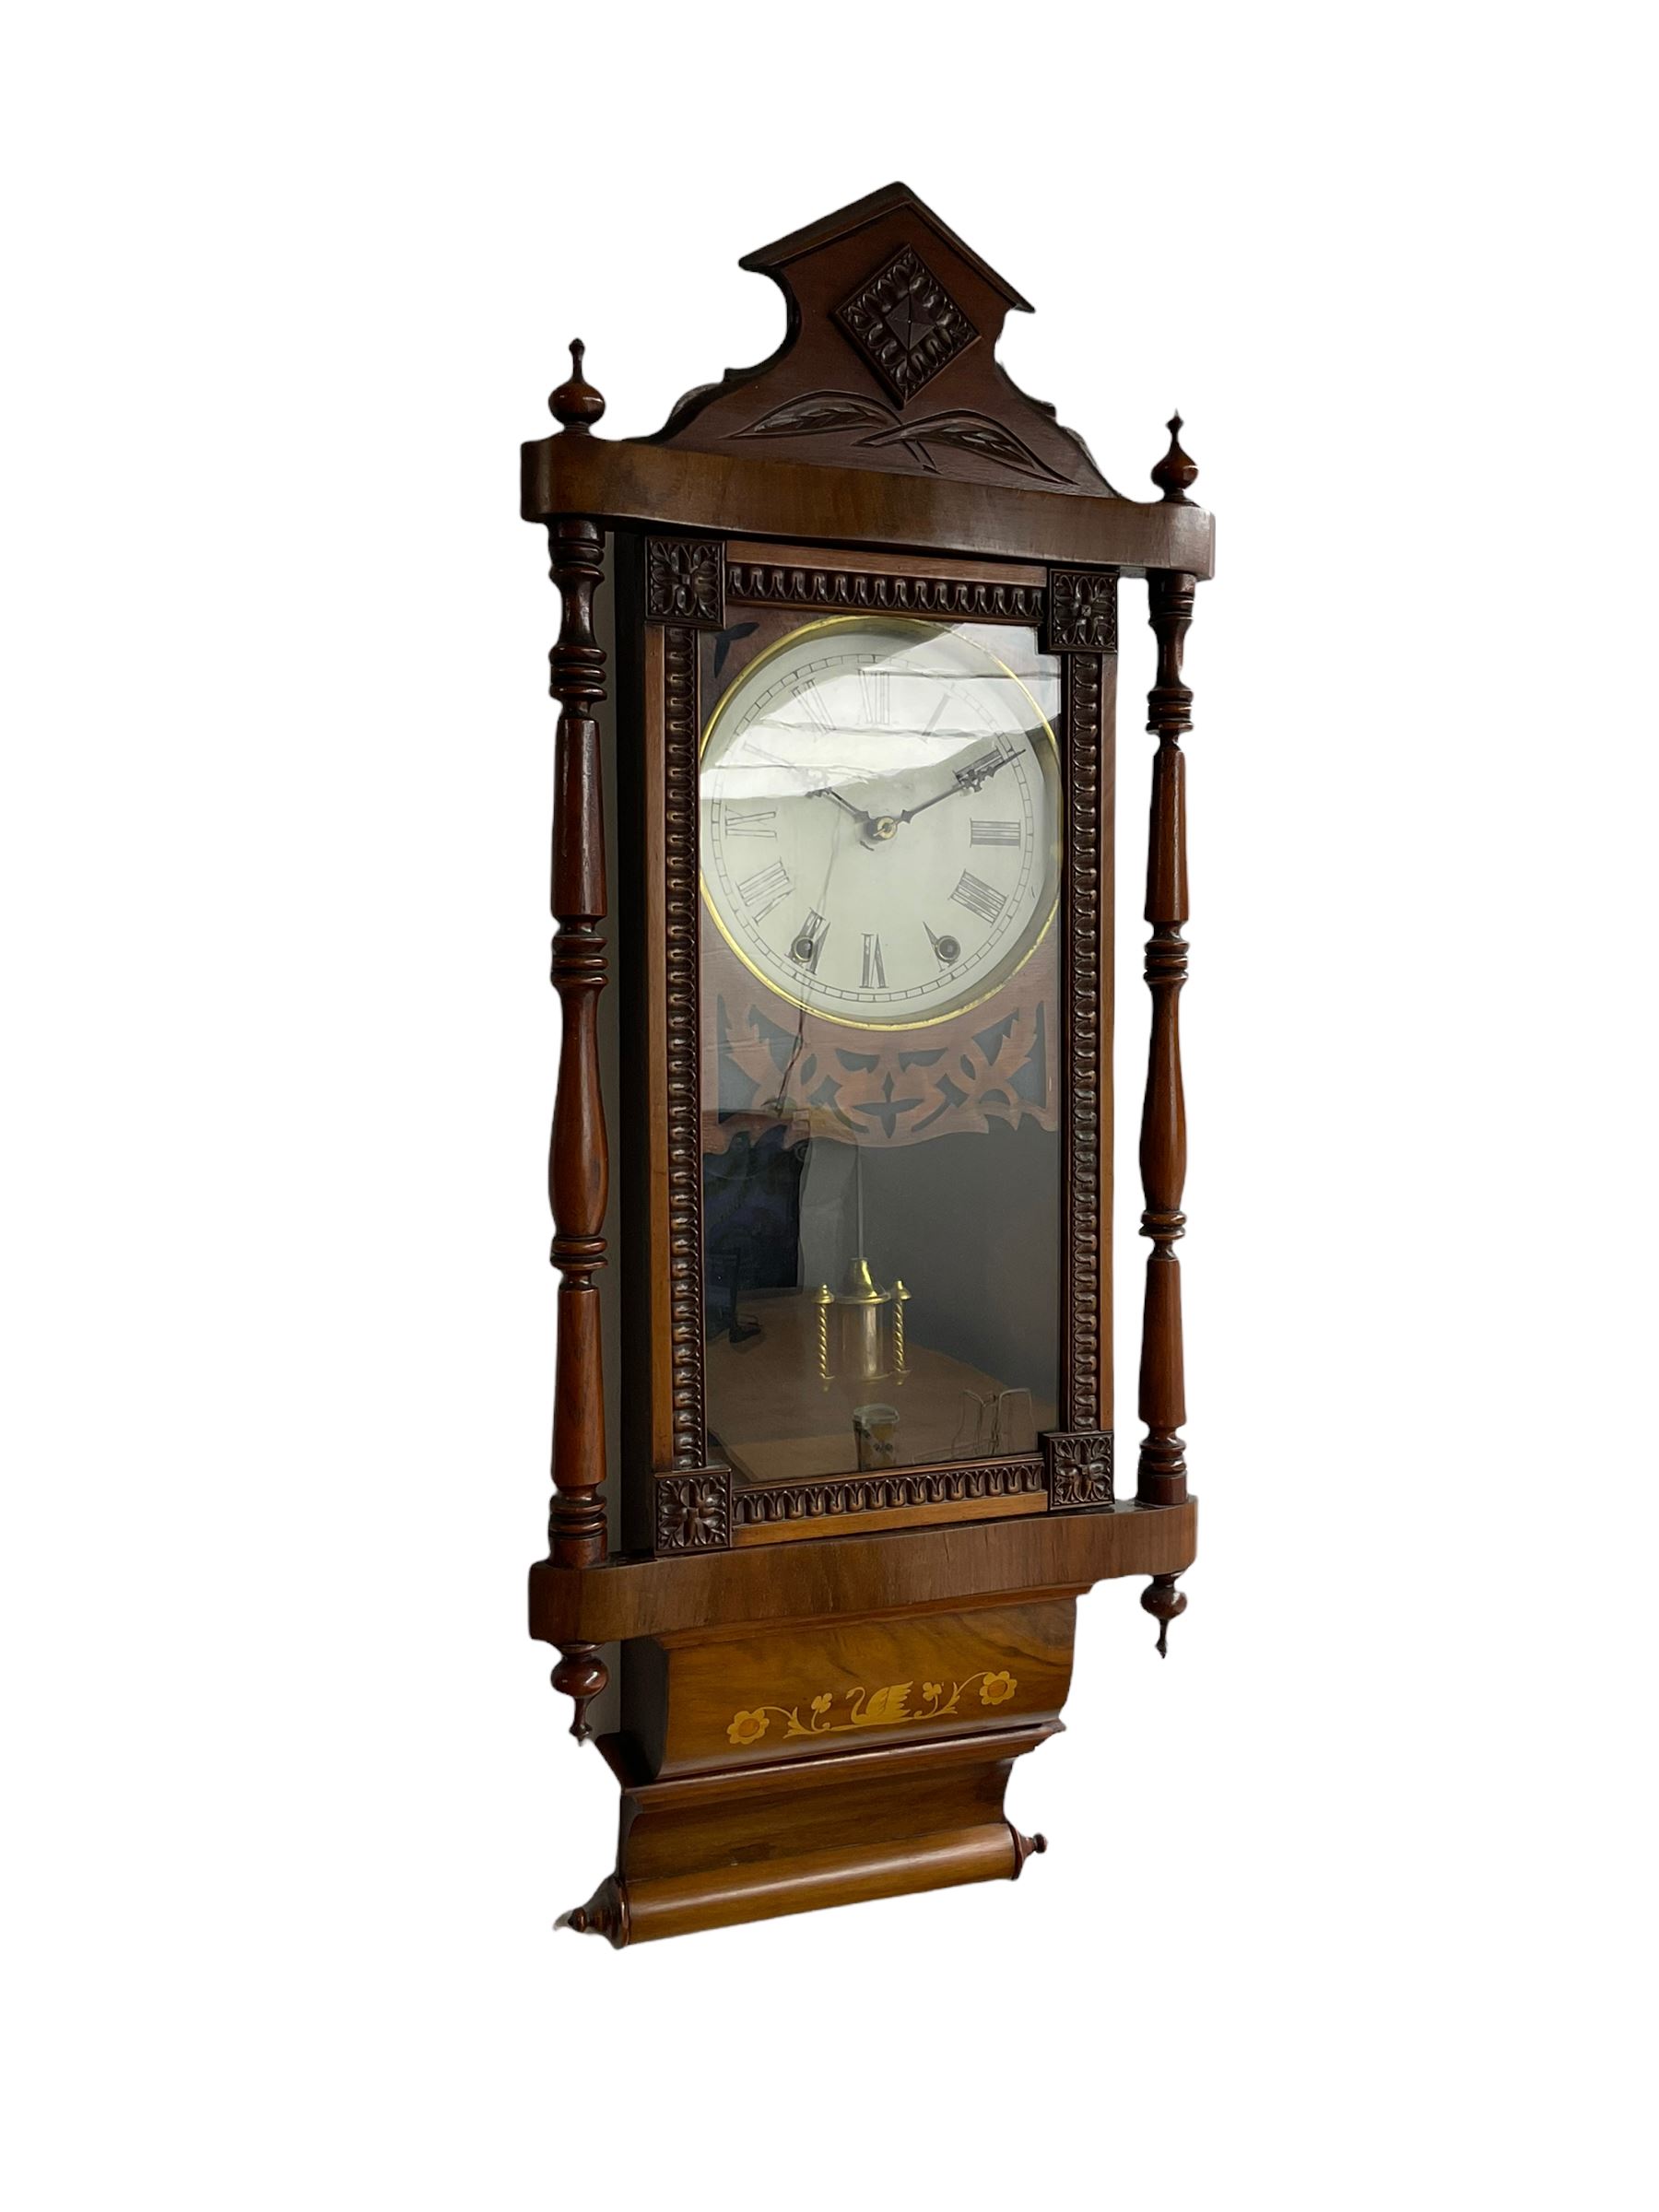 A 19th century American wall clock manufactured by the “New Haven” clock company, in a mahogany